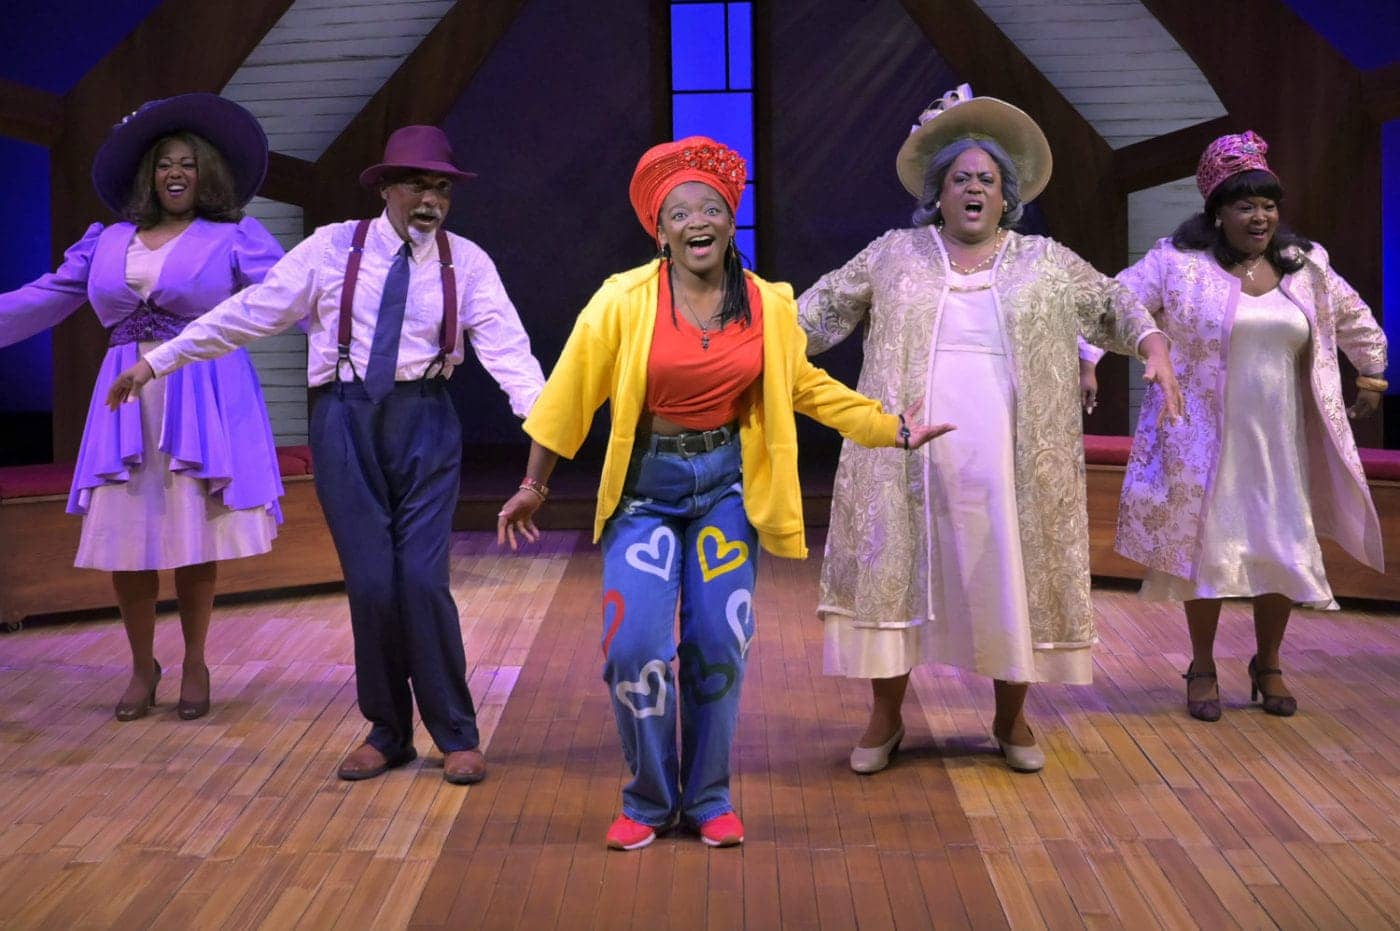 to-r_-Constance-Jewell-Lopez-Darryl-V.-Jones-Juanita-Harris-Phaedra-Tillery-Boughton-2023-1400x931, ‘Crowns’ comes to the Bay Area Sept. 9 through Oct. 6, Culture Currents Featured Local News & Views 